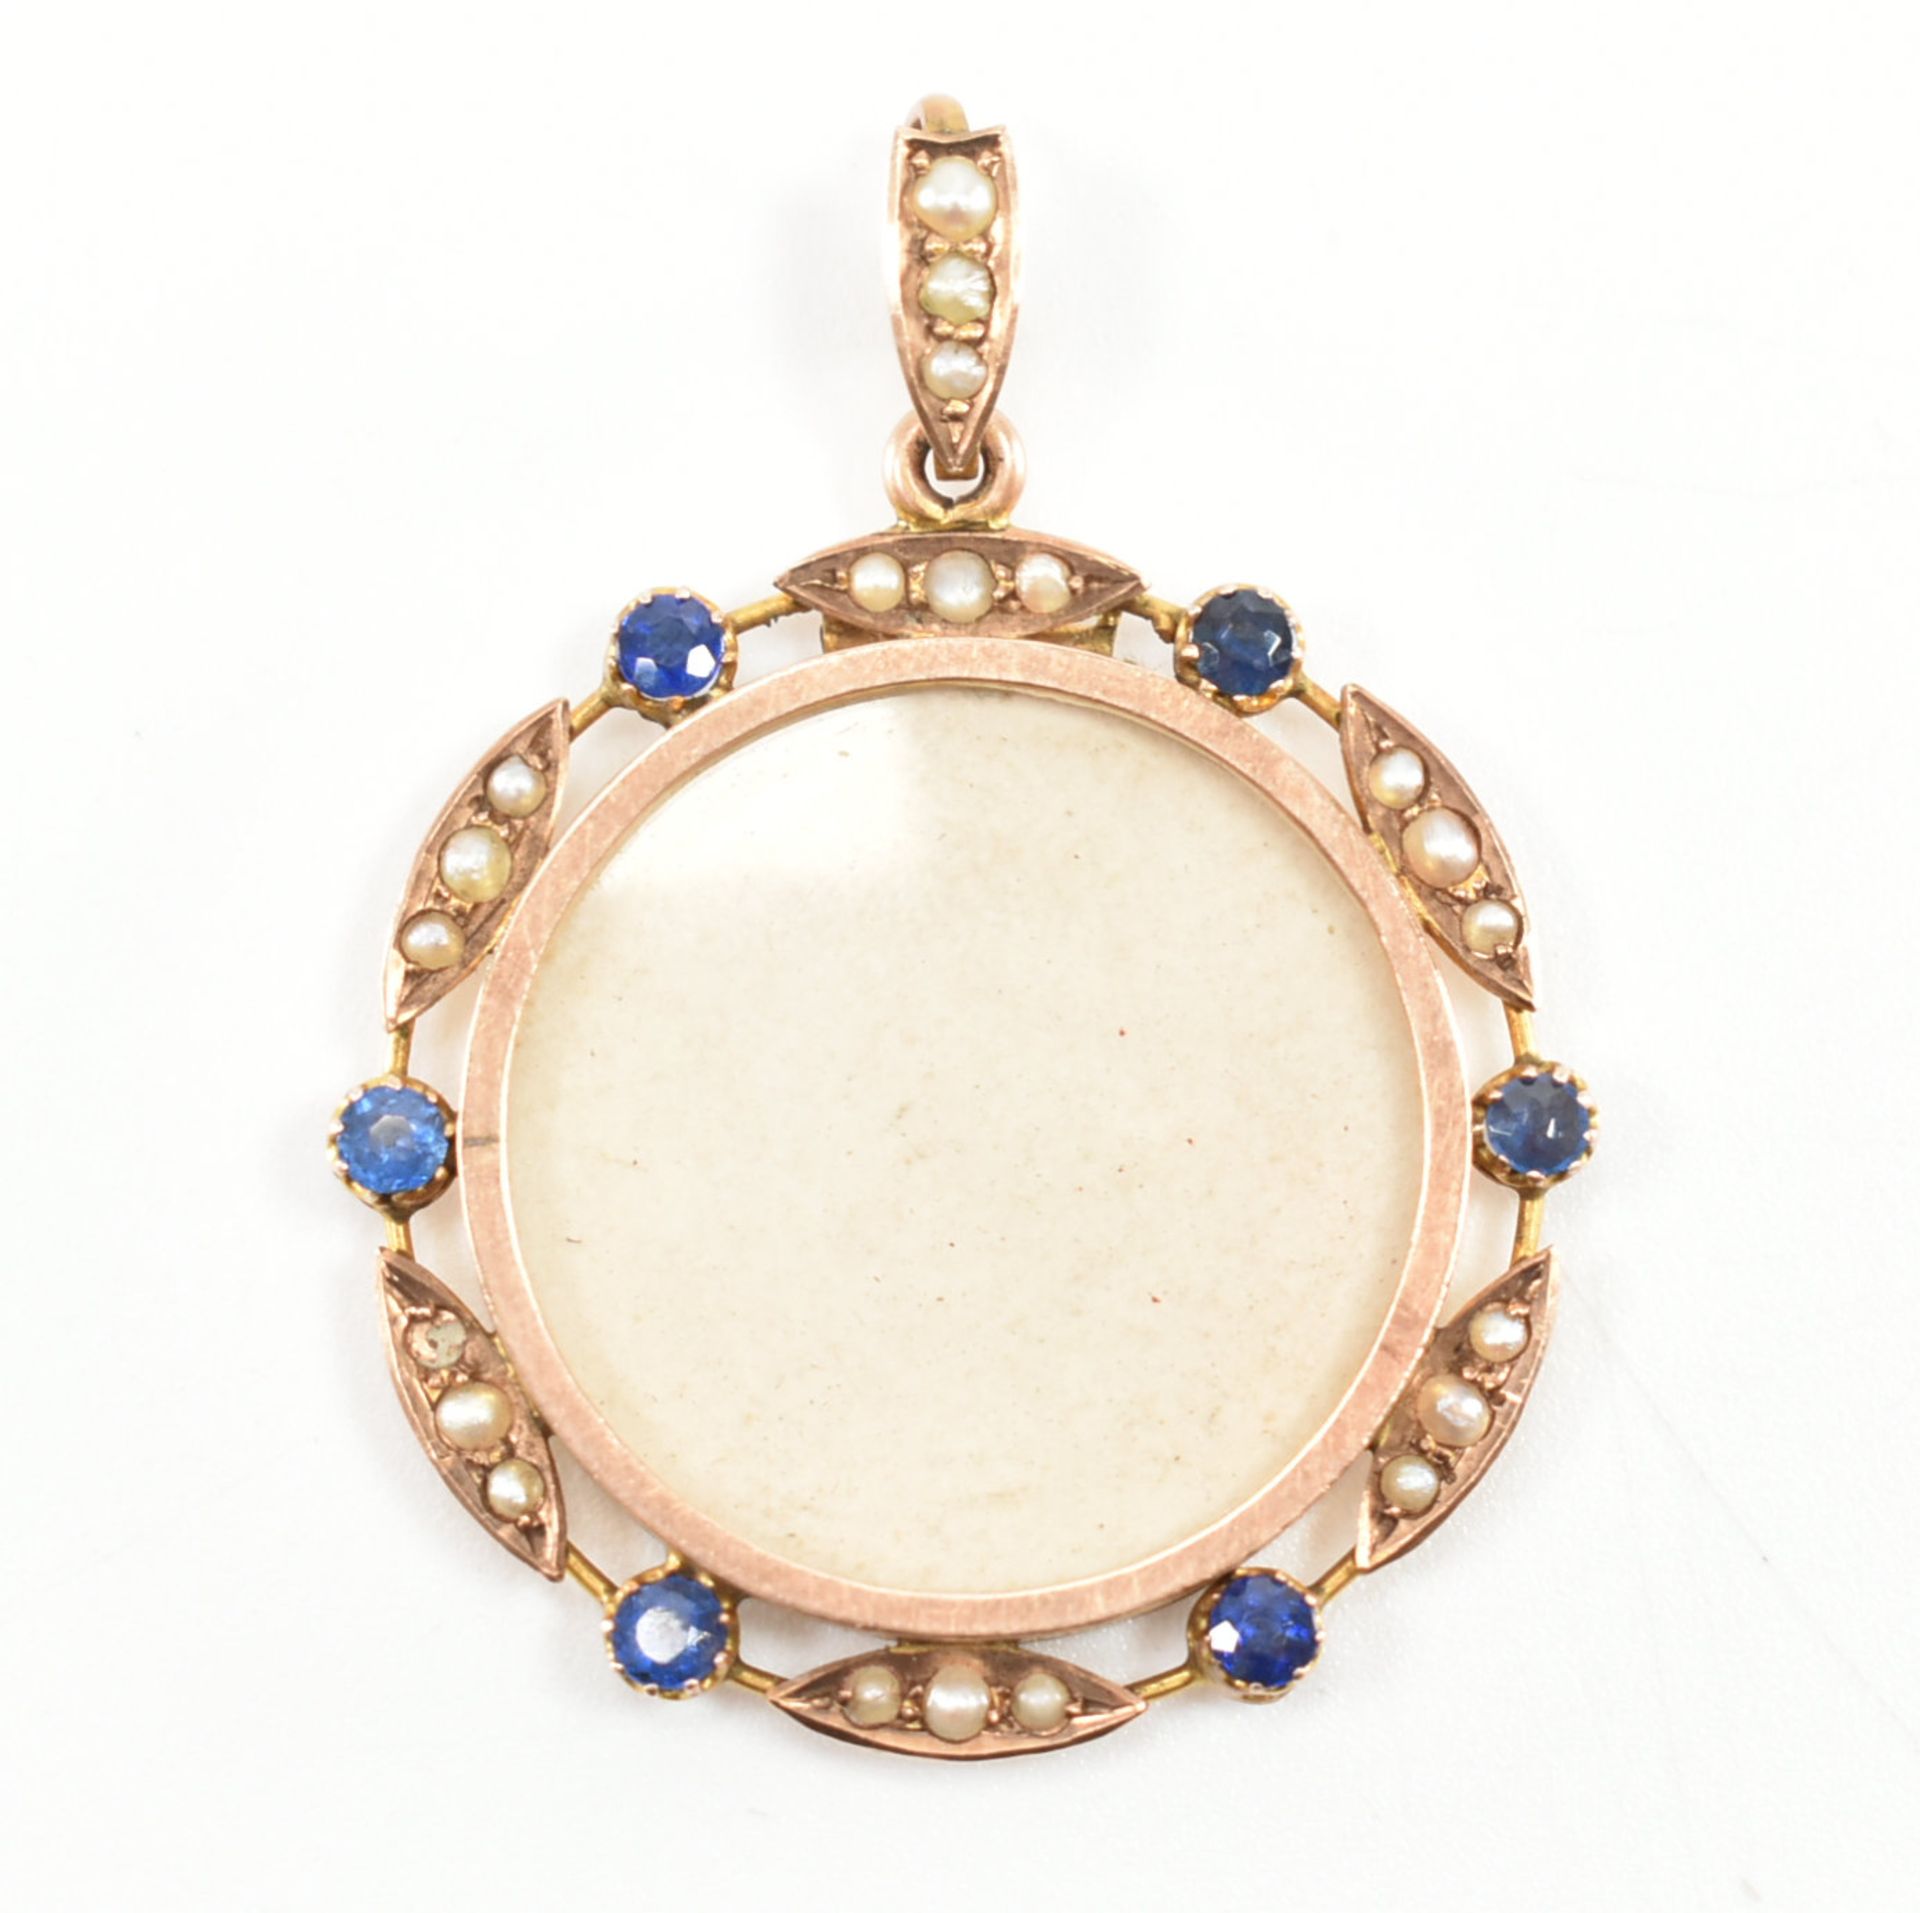 19TH CENTURY VICTORIAN SEED PEARL & BLUE STONE LOCKET - Image 2 of 5